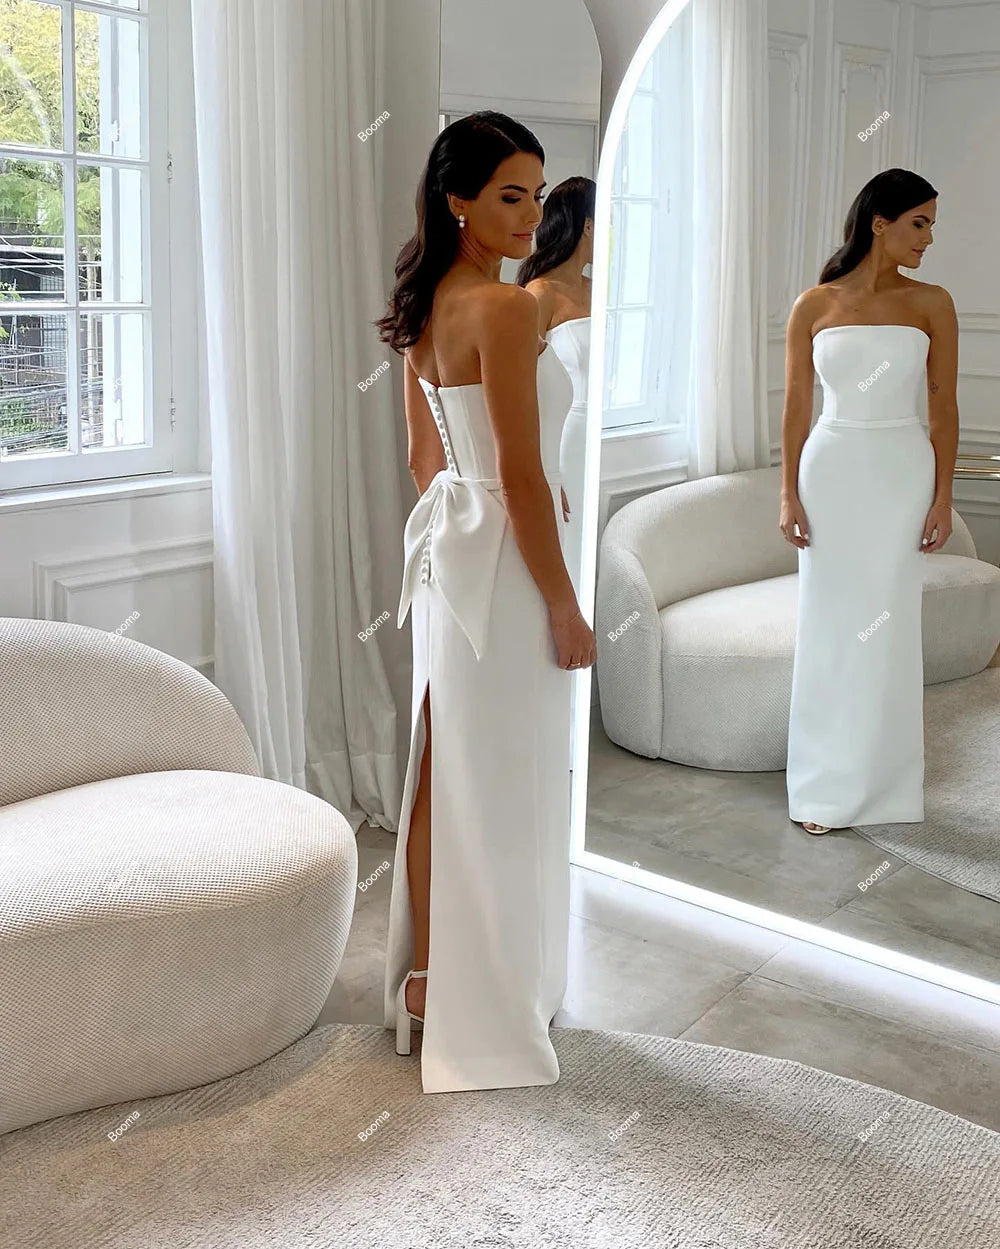 White Elegant Mermaid Wedidng Party Dresses Strapless Women's Evening Dress with Bow Button Slit Formal Prom Gowns